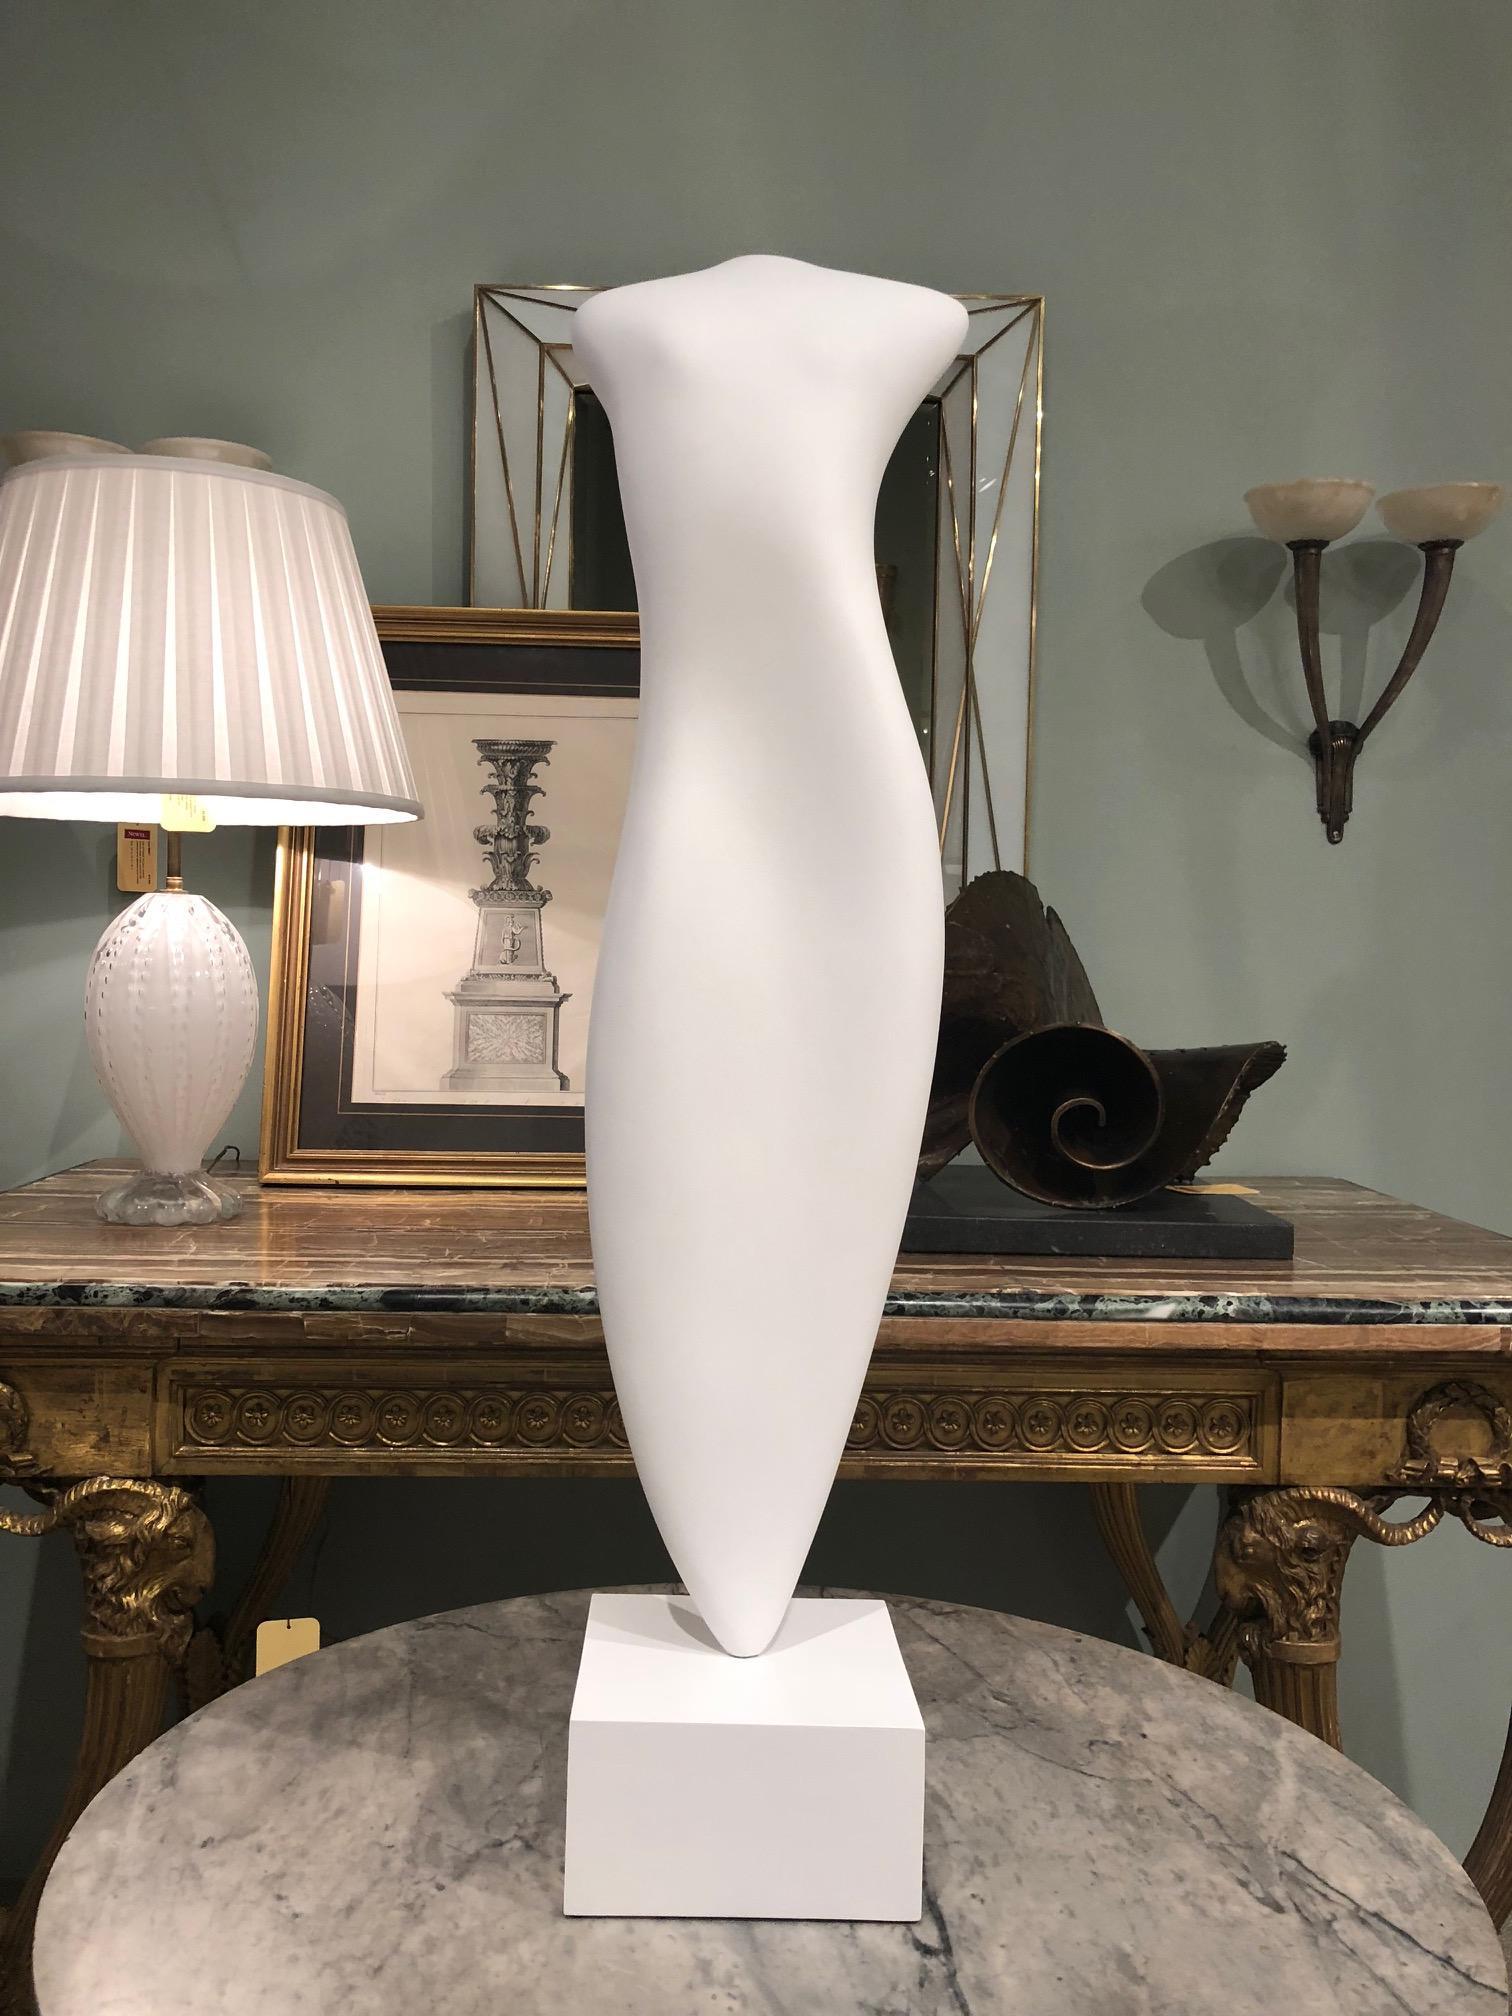 American postwar design aqua resin and acrylic sculpture of a vertical form 'Goddess Ethereal' on a white painted wood base (Kevin Kelly).
   